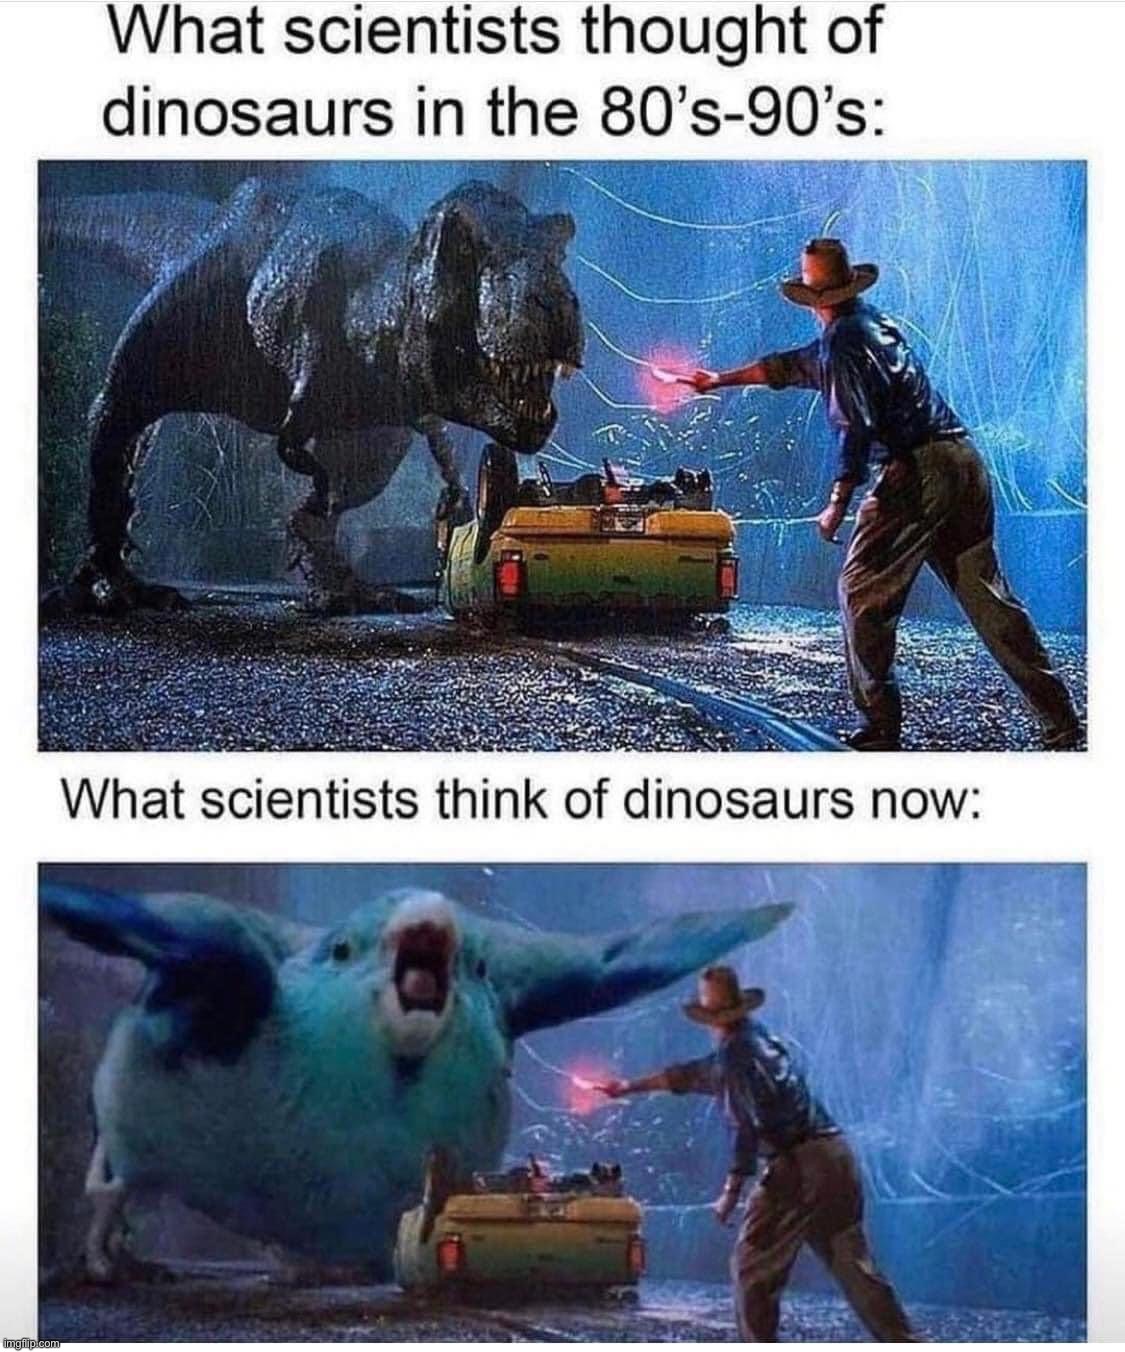 Dinosaurs then and now | image tagged in dinosaurs then and now | made w/ Imgflip meme maker